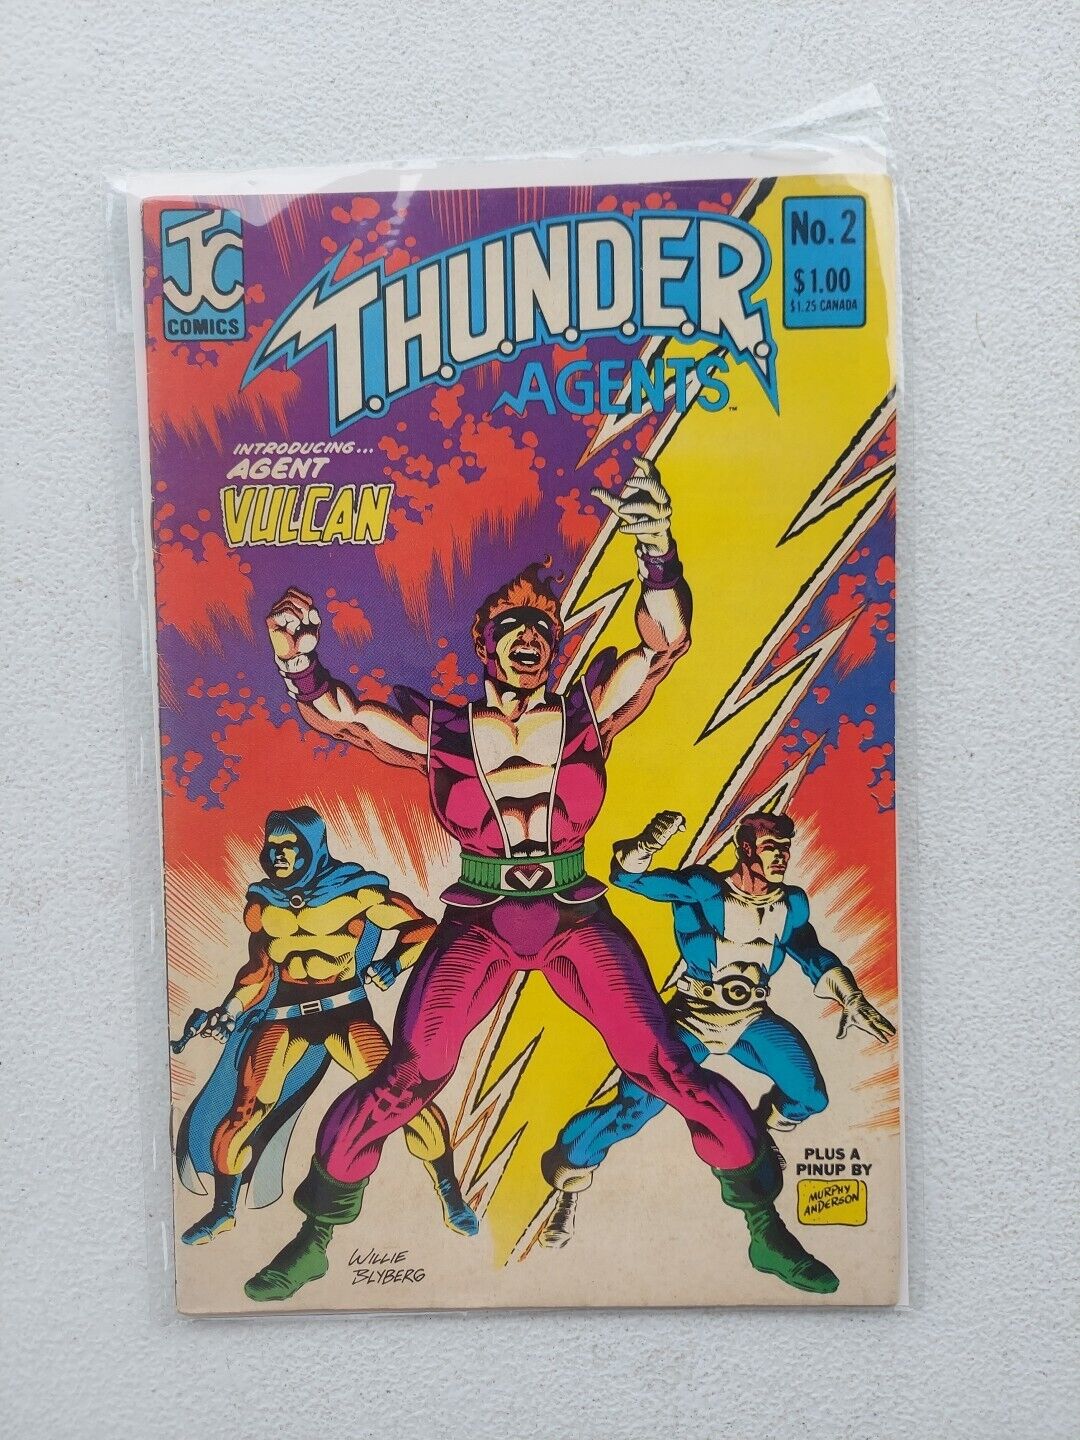 THUNDER AGENTS #2 Comic (1983) JC Productions, Wally Wood